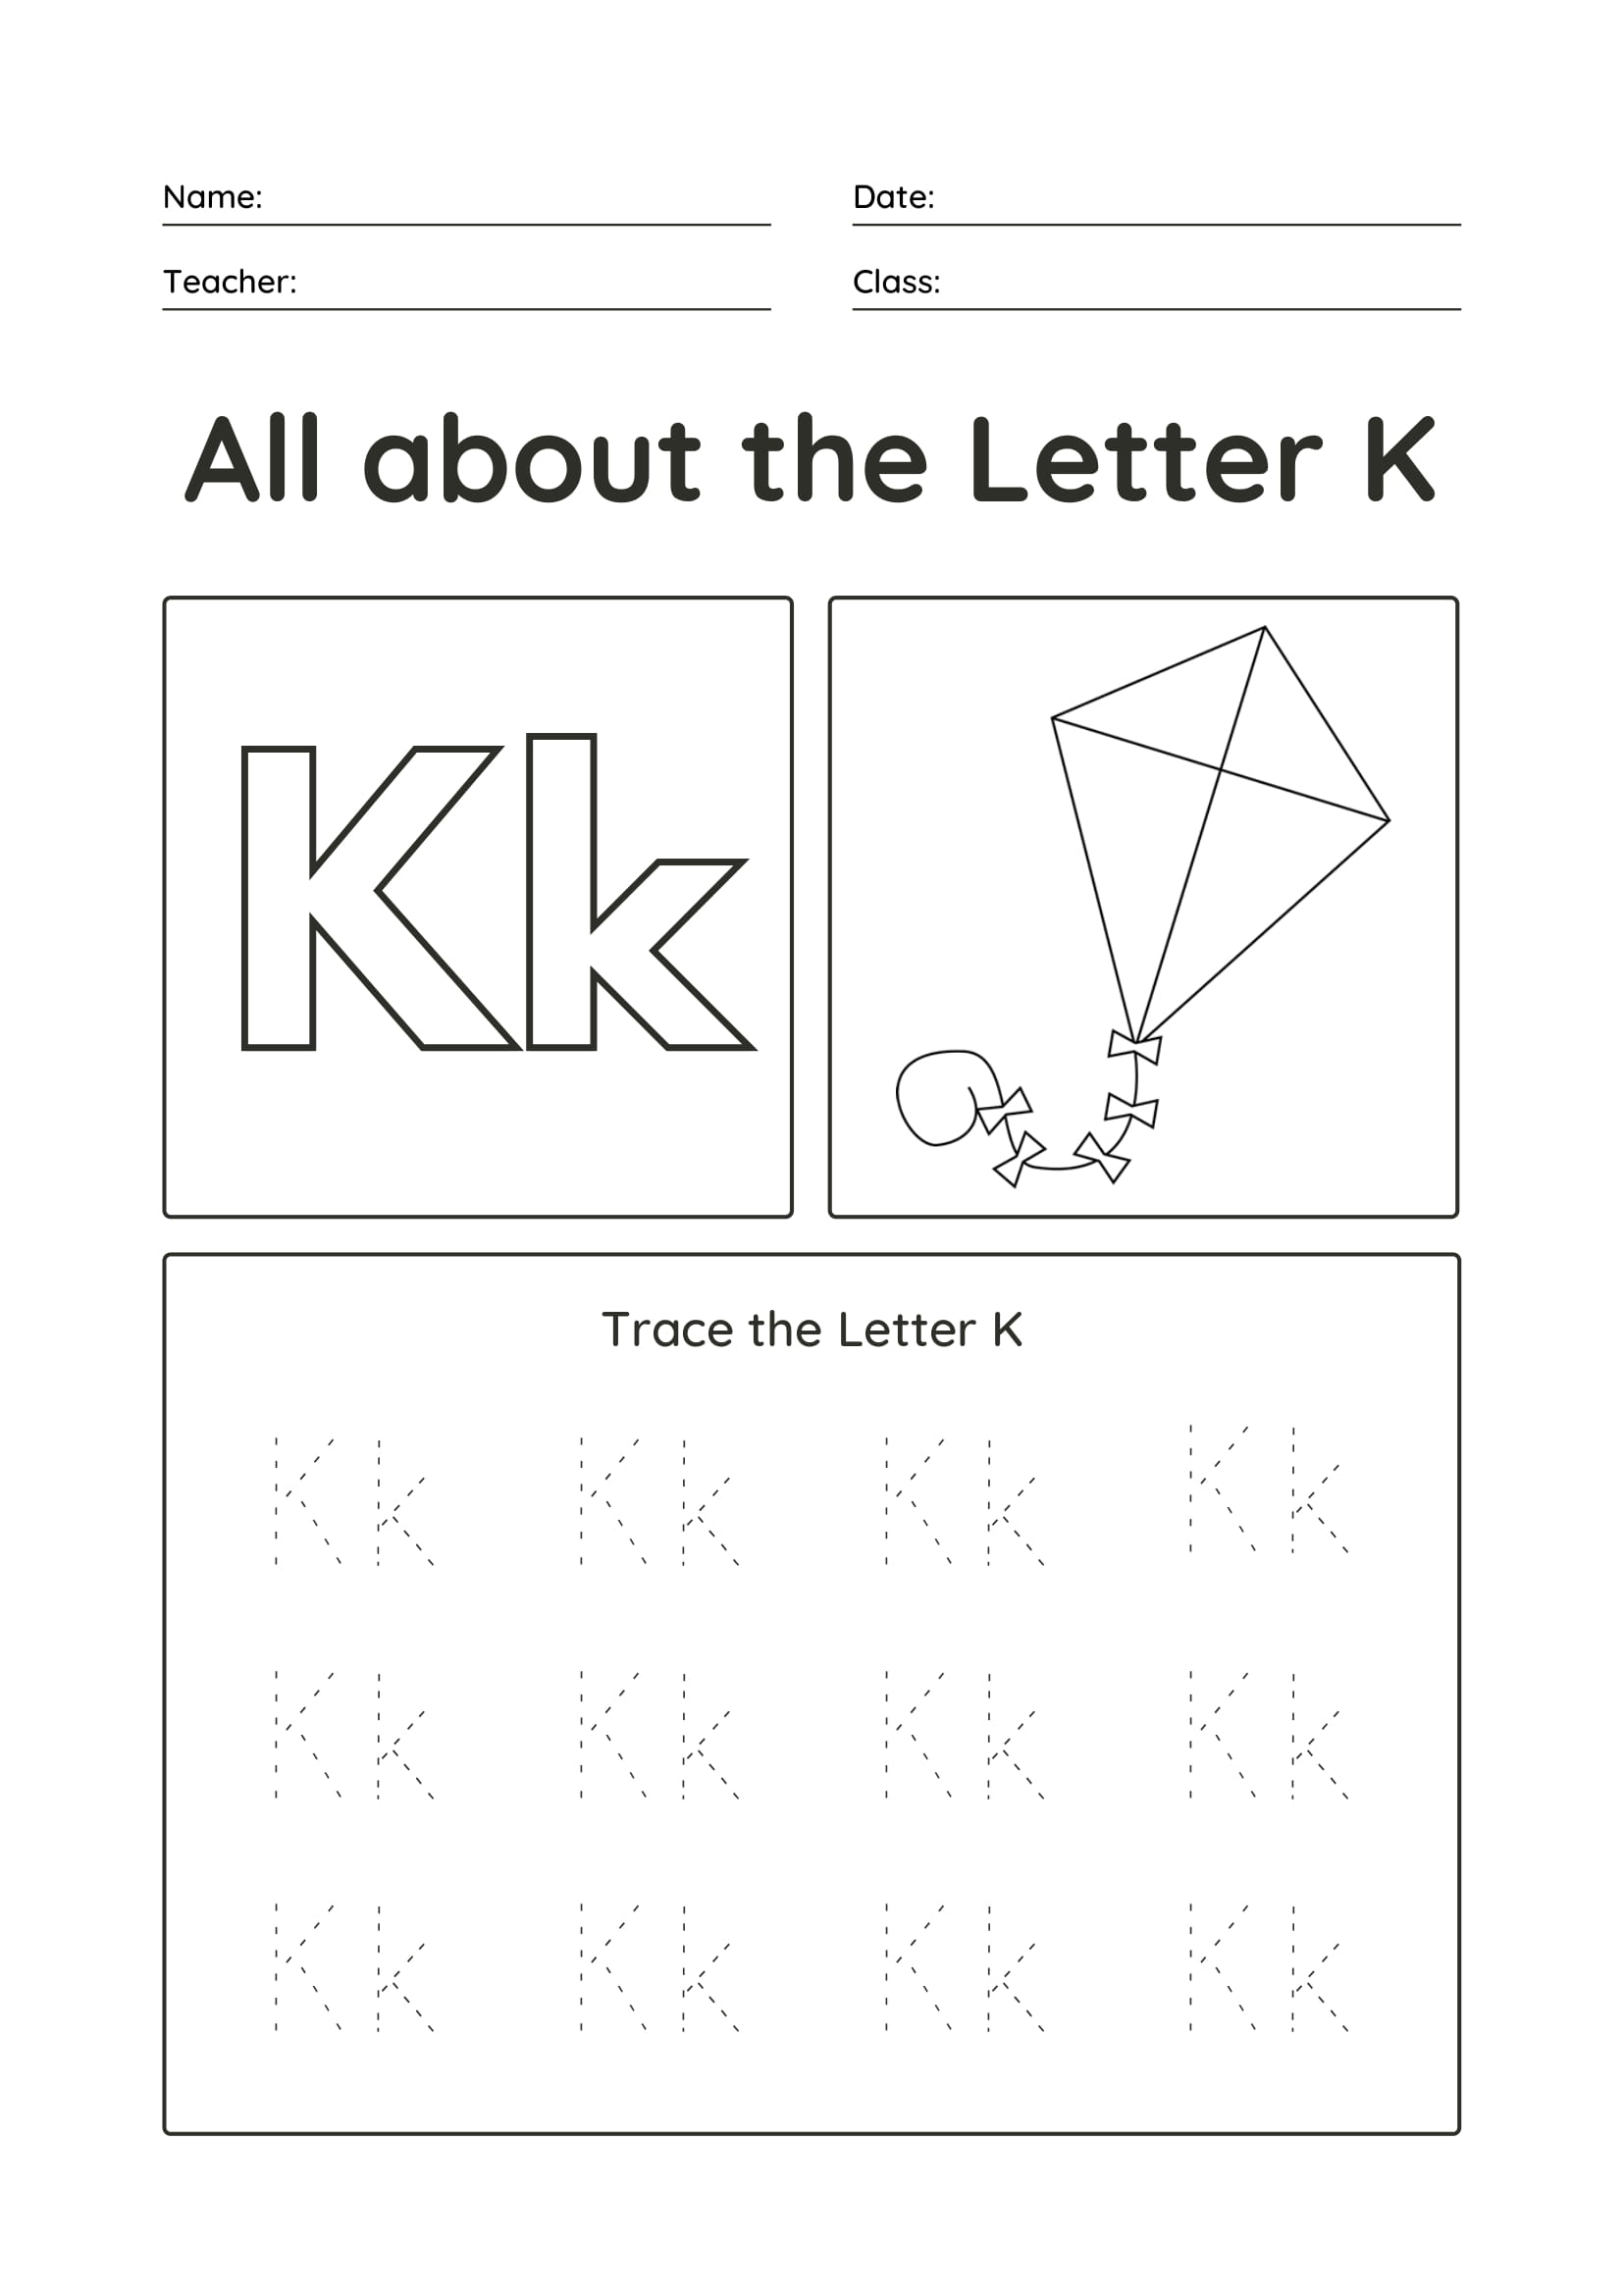 trace-the-letter-k-uppercase-and-lowercase-tracing-sheet-for-kids-worksheet-bee